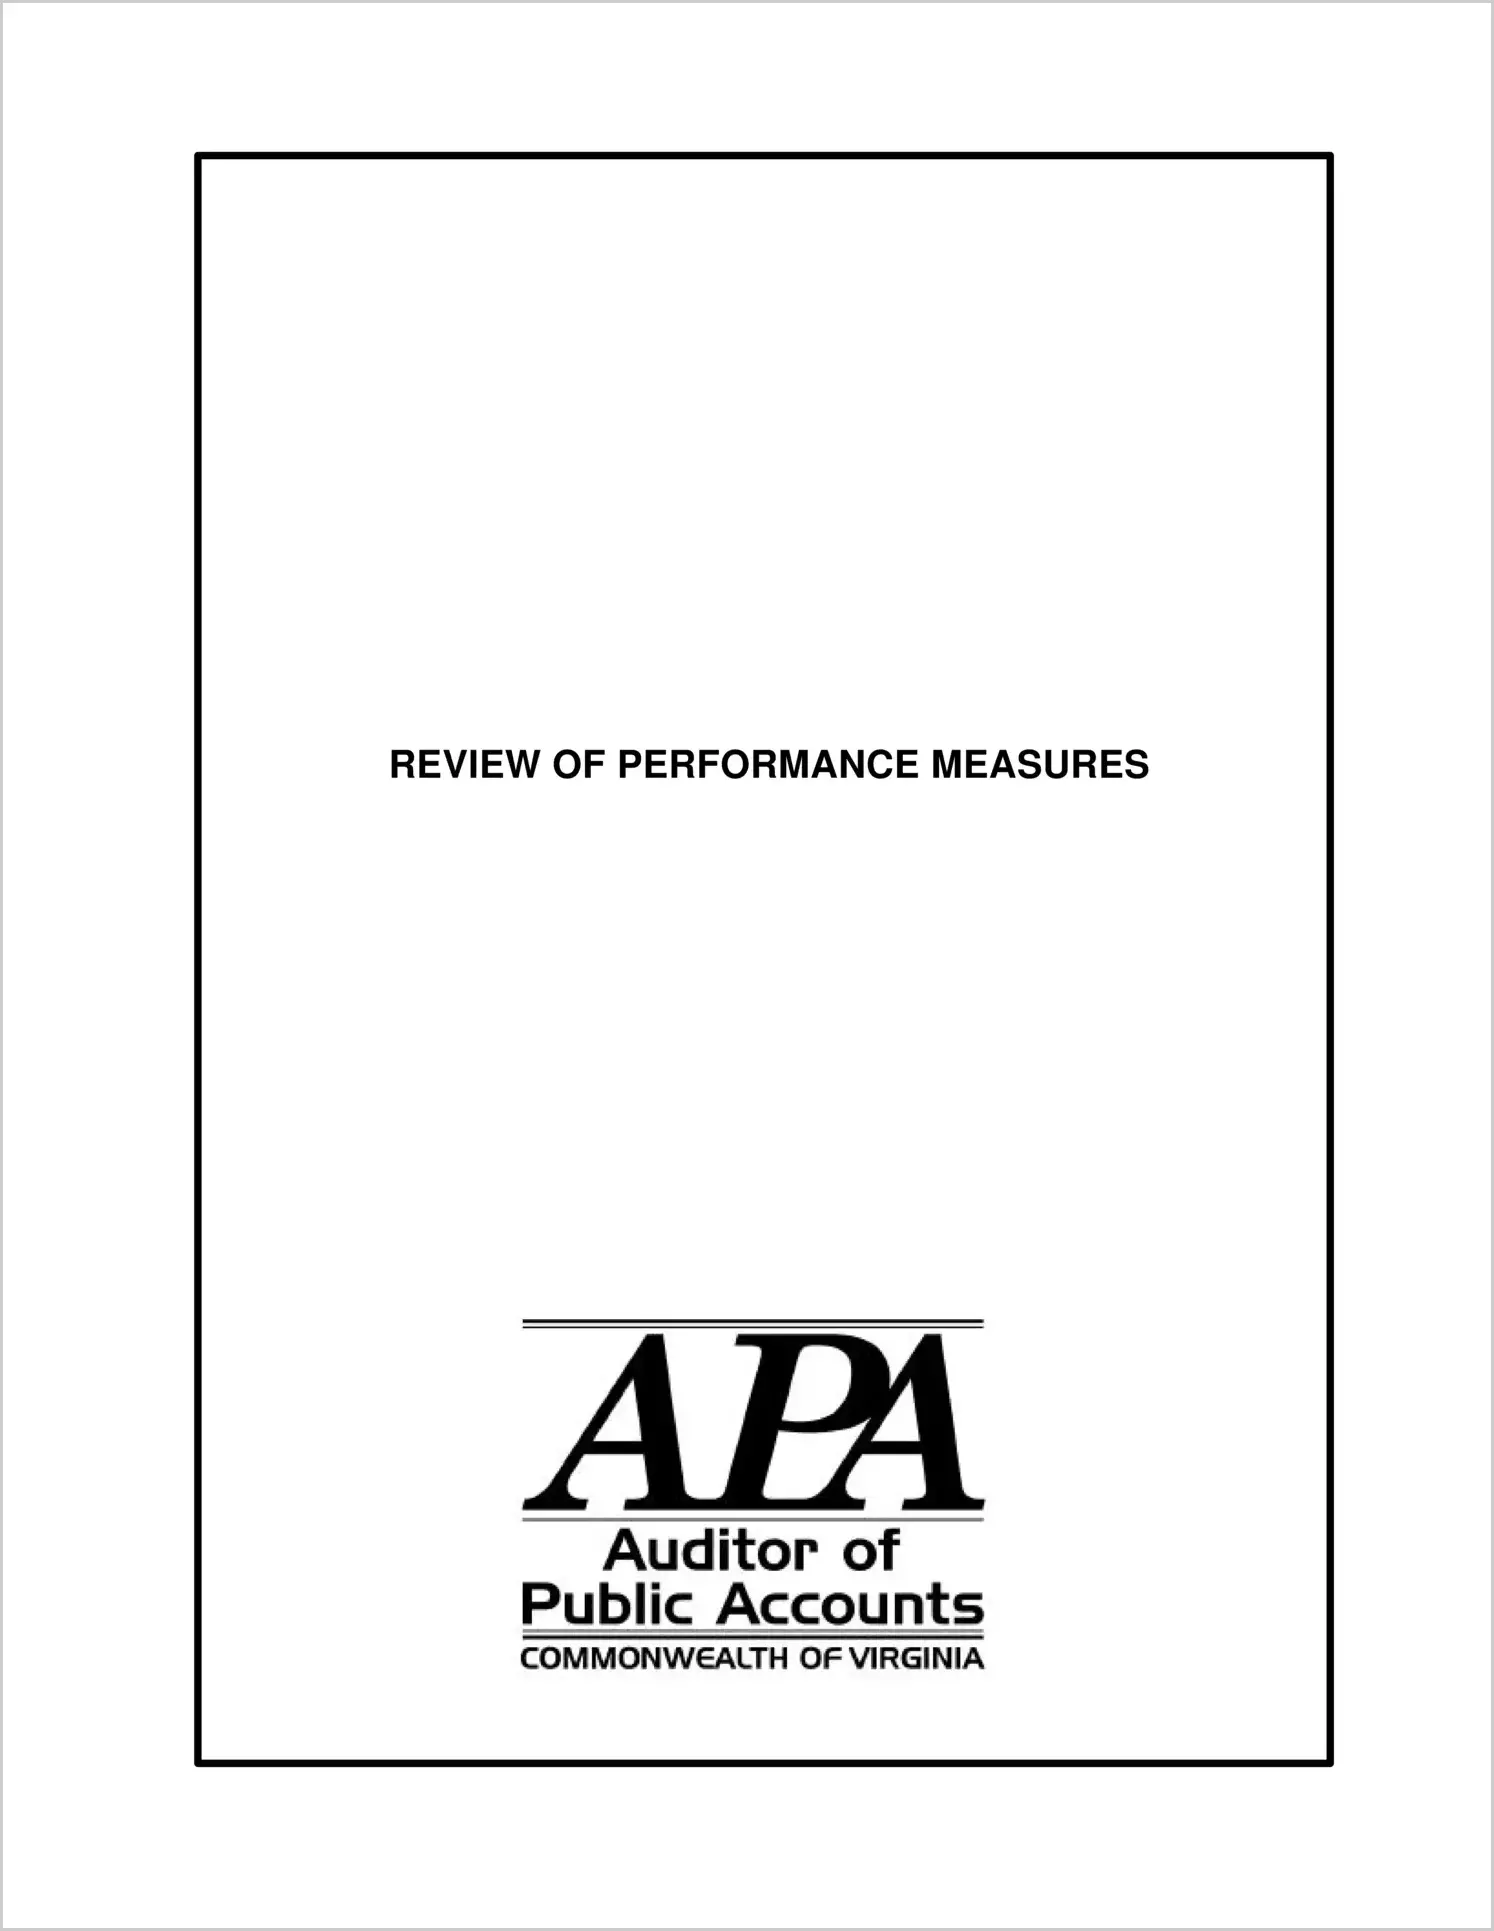 Review of Performance Measures as of October 15, 2002